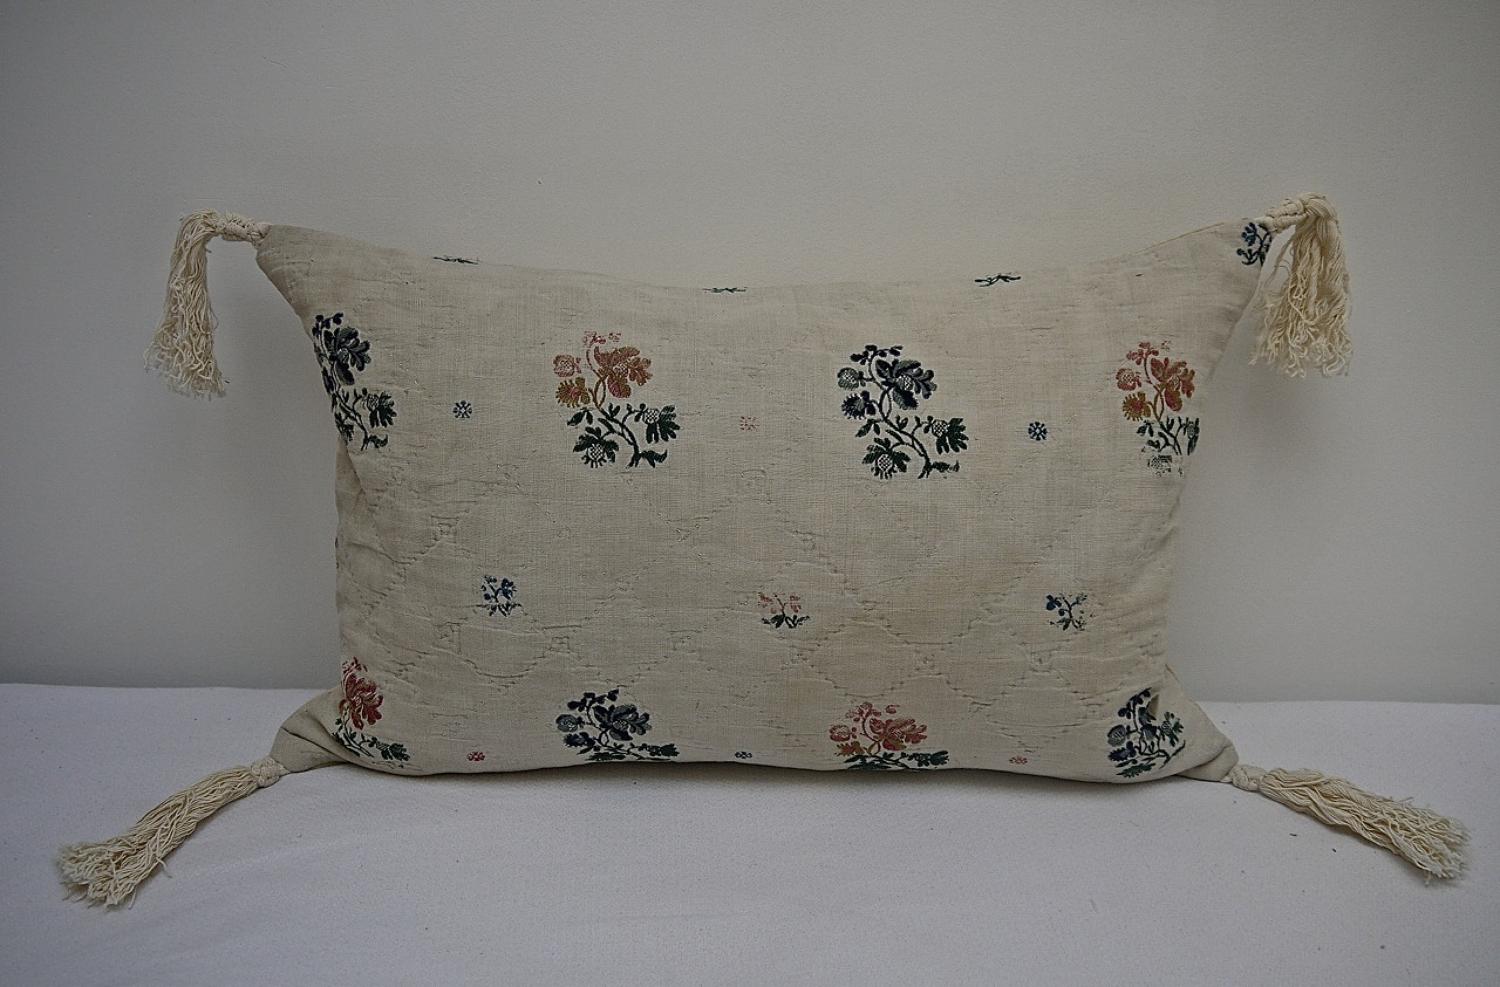 Late 18th century French wool woven on linen cushion